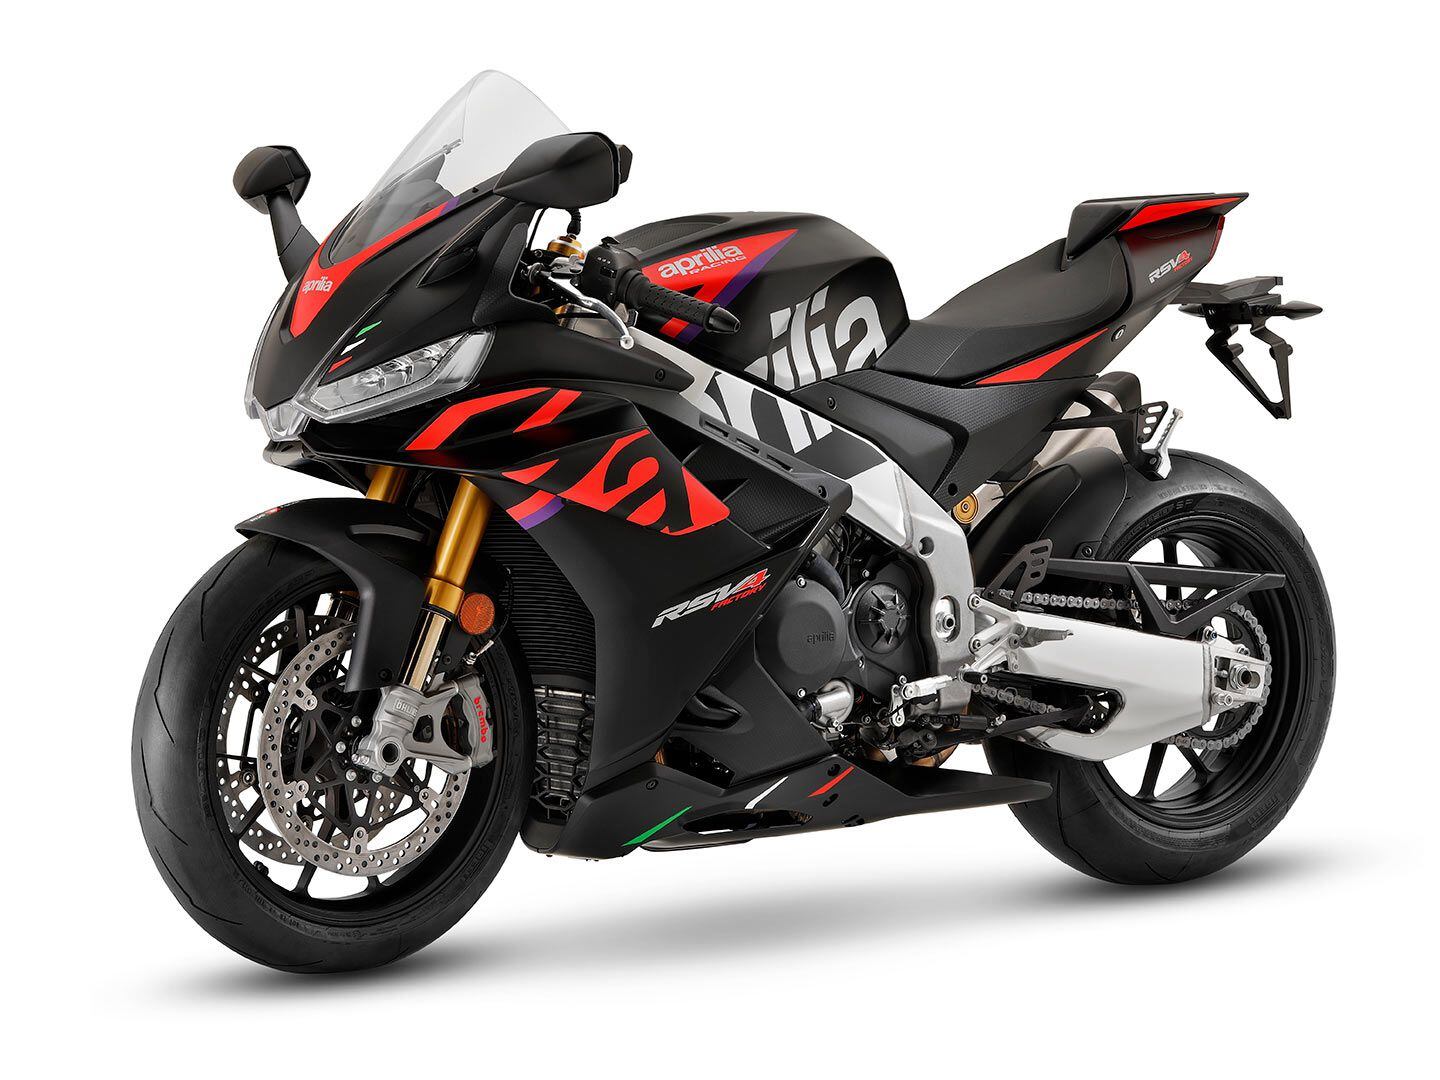 The Aprilia RSV4 Factory in Time Attack livery ($25,999).